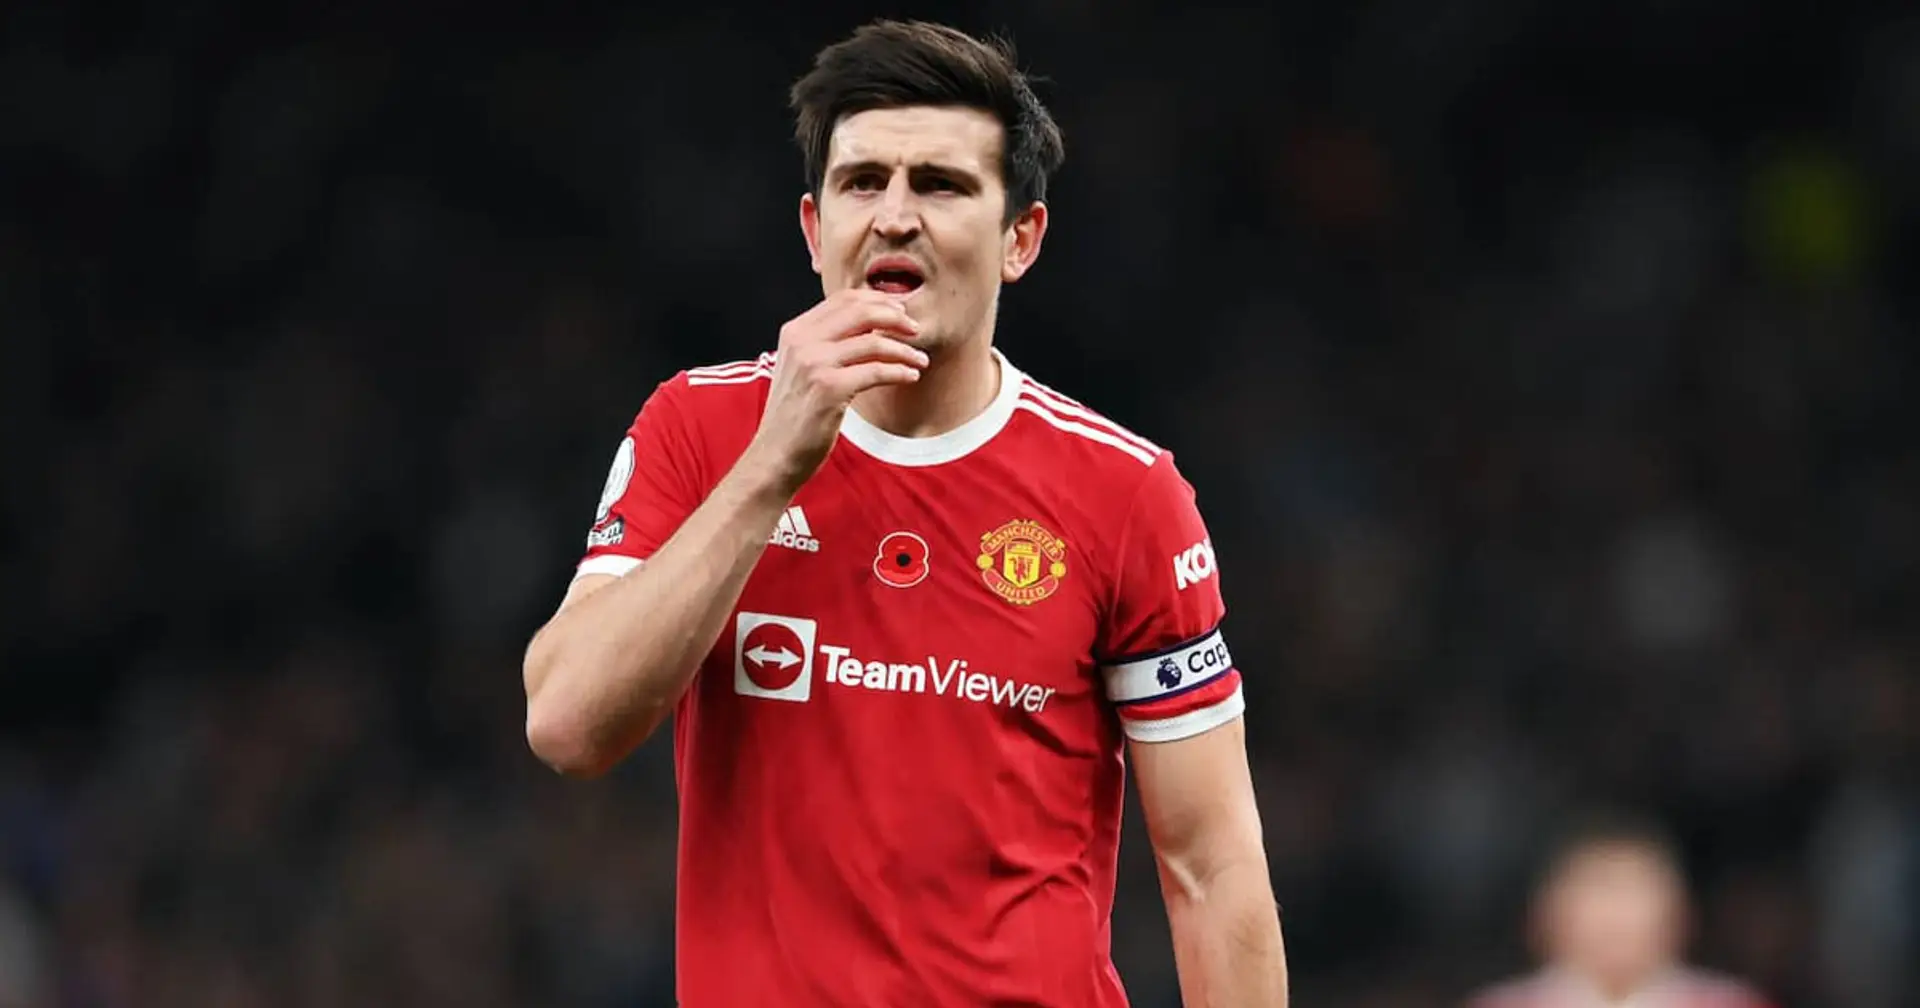 Maguire promotion to captain was 'resented' by few United players